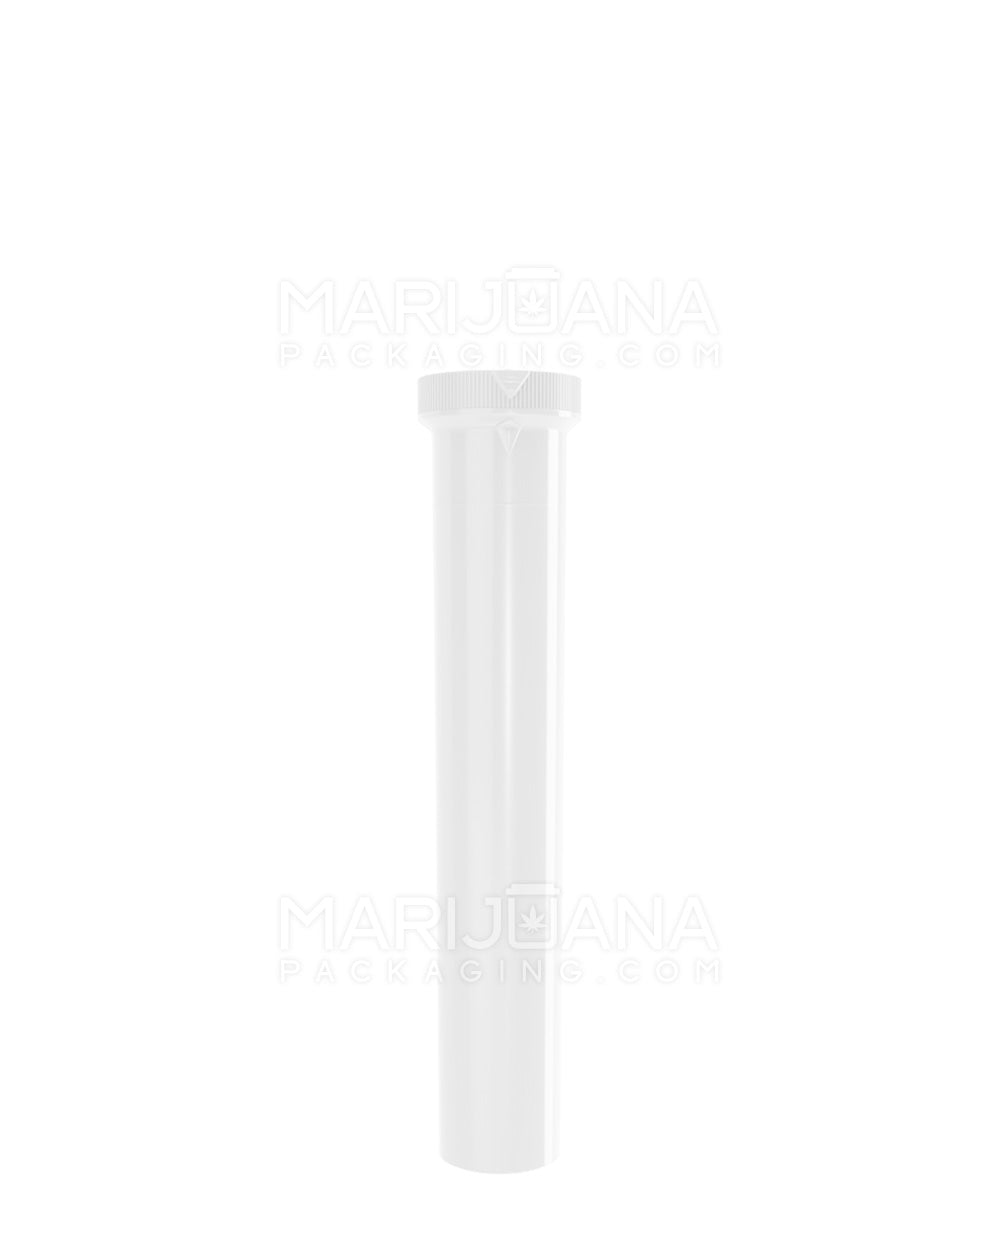 Child Resistant | ‘Line-Up Arrow’ Pre-Roll Tubes | 94mm - Opaque White Plastic - 750 Count - 3